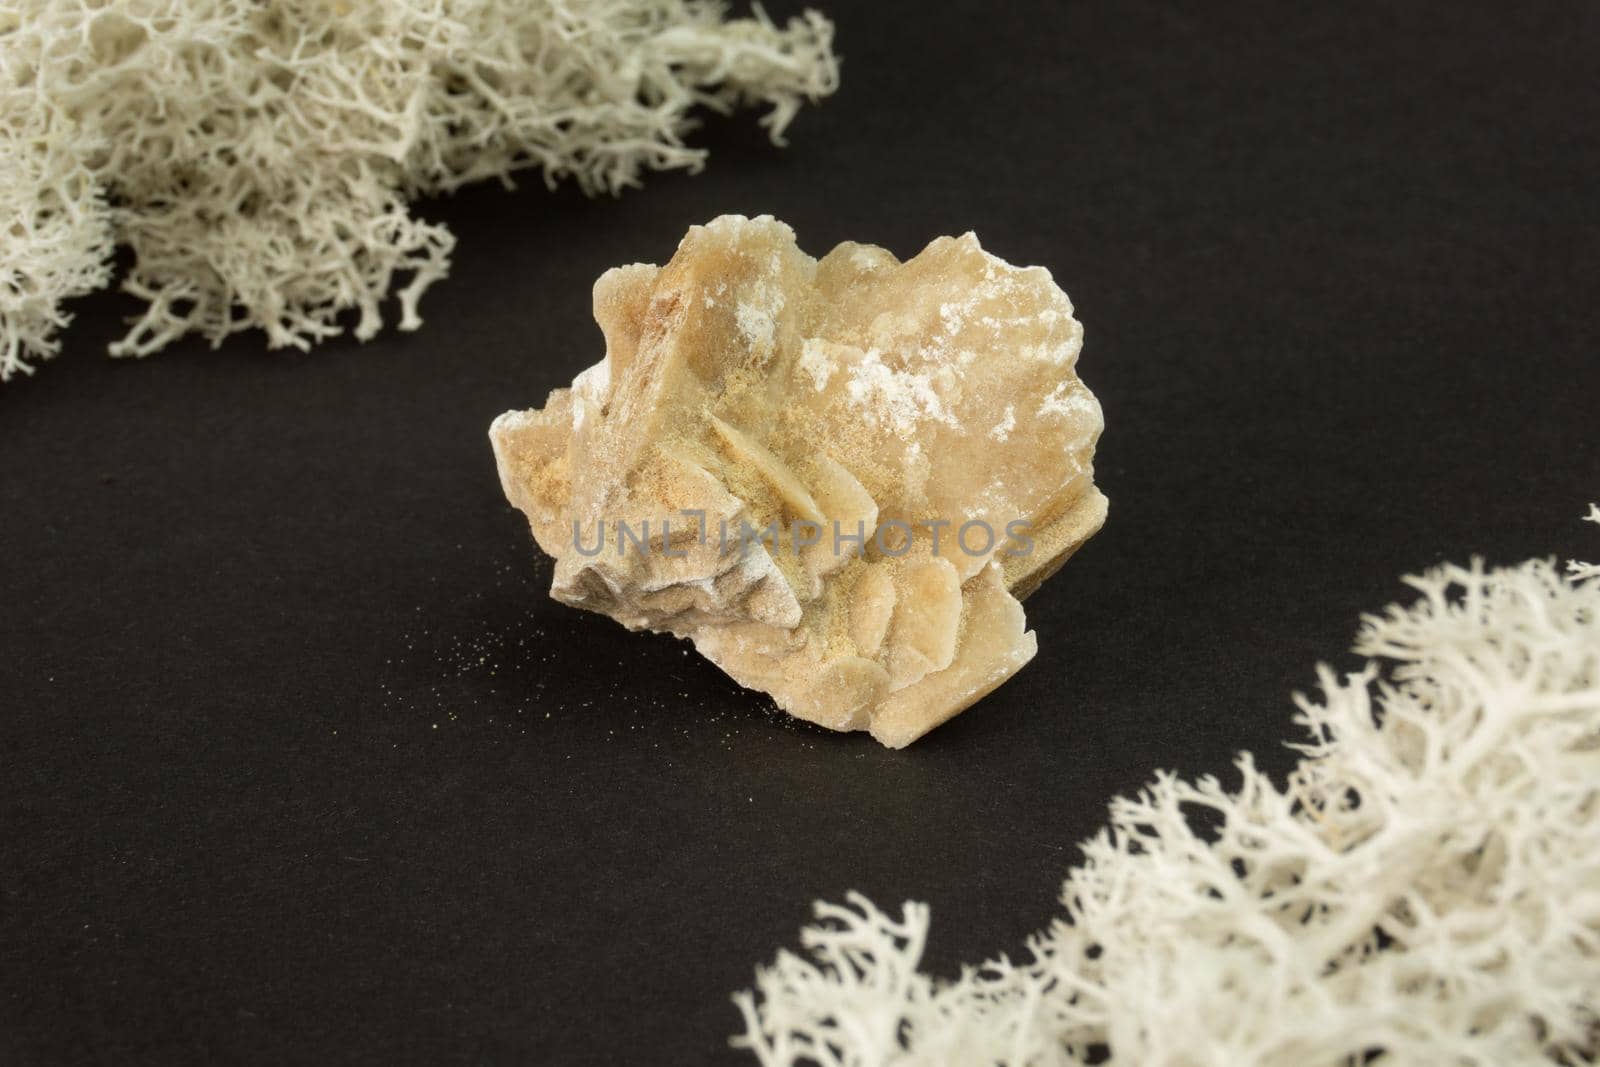 Desert rose crystal from Tunisia. Natural mineral stone on black background. Mineralogy, geology, magic of stones, semi-precious stones and samples of minerals. Close-up macro photo